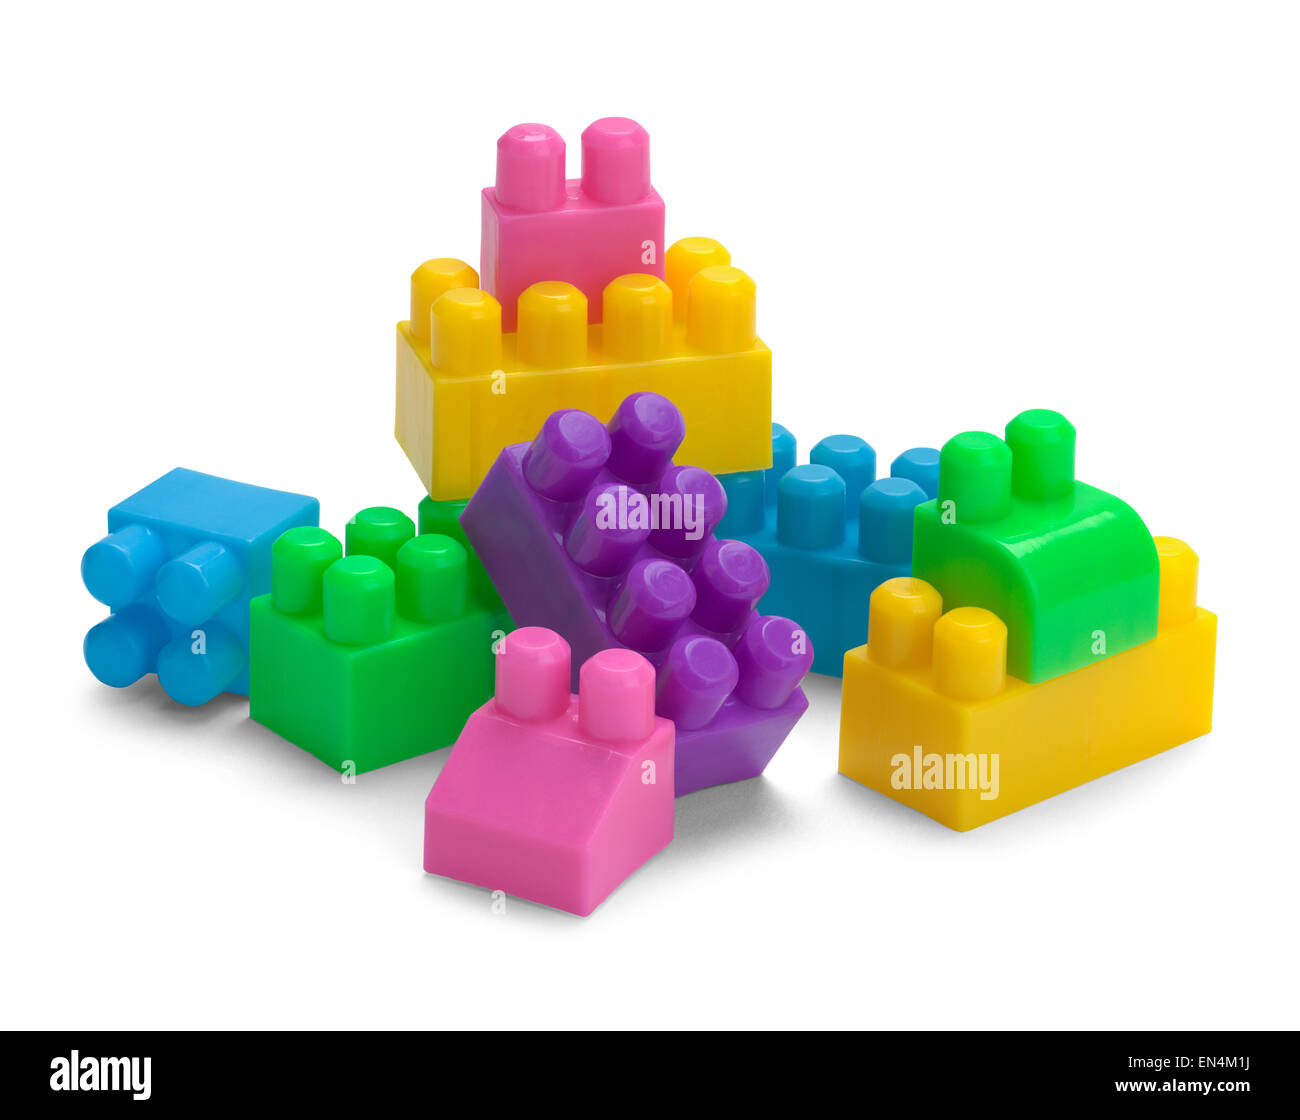 Plastic Toy Building Blocks Isolated on a White Background. Stock Photo